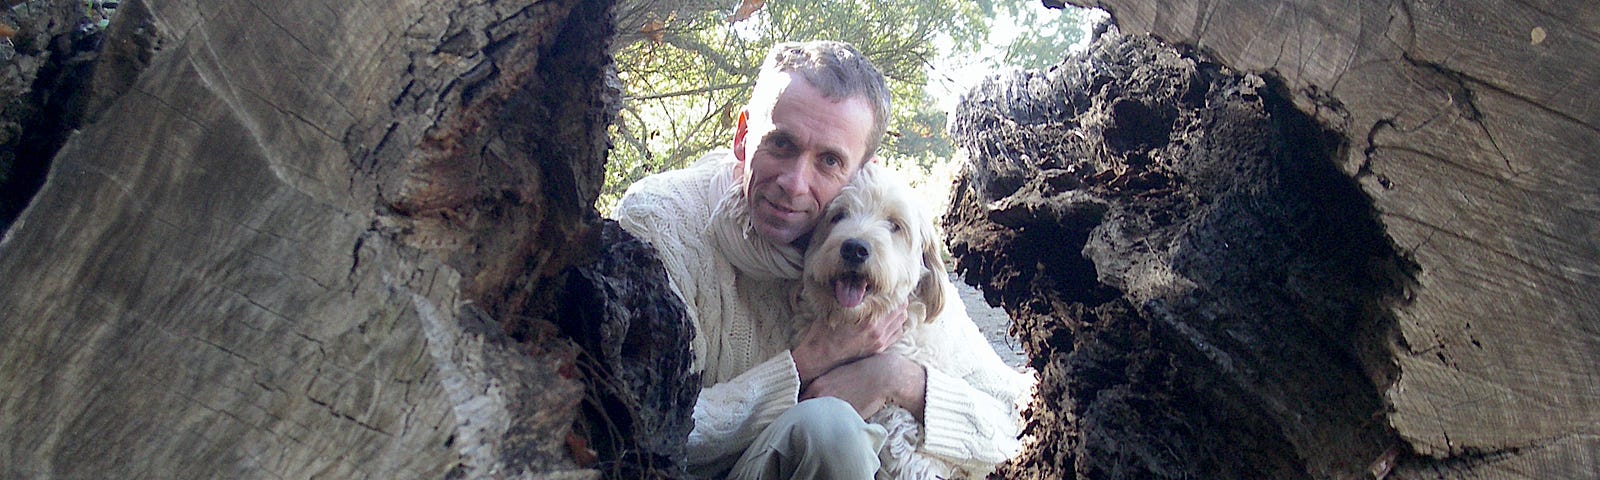 Karsten Ramser with his dog Delek looking through a hole in a tree. The gentleness of the image symbolises the transformation of depression into spiritual development.